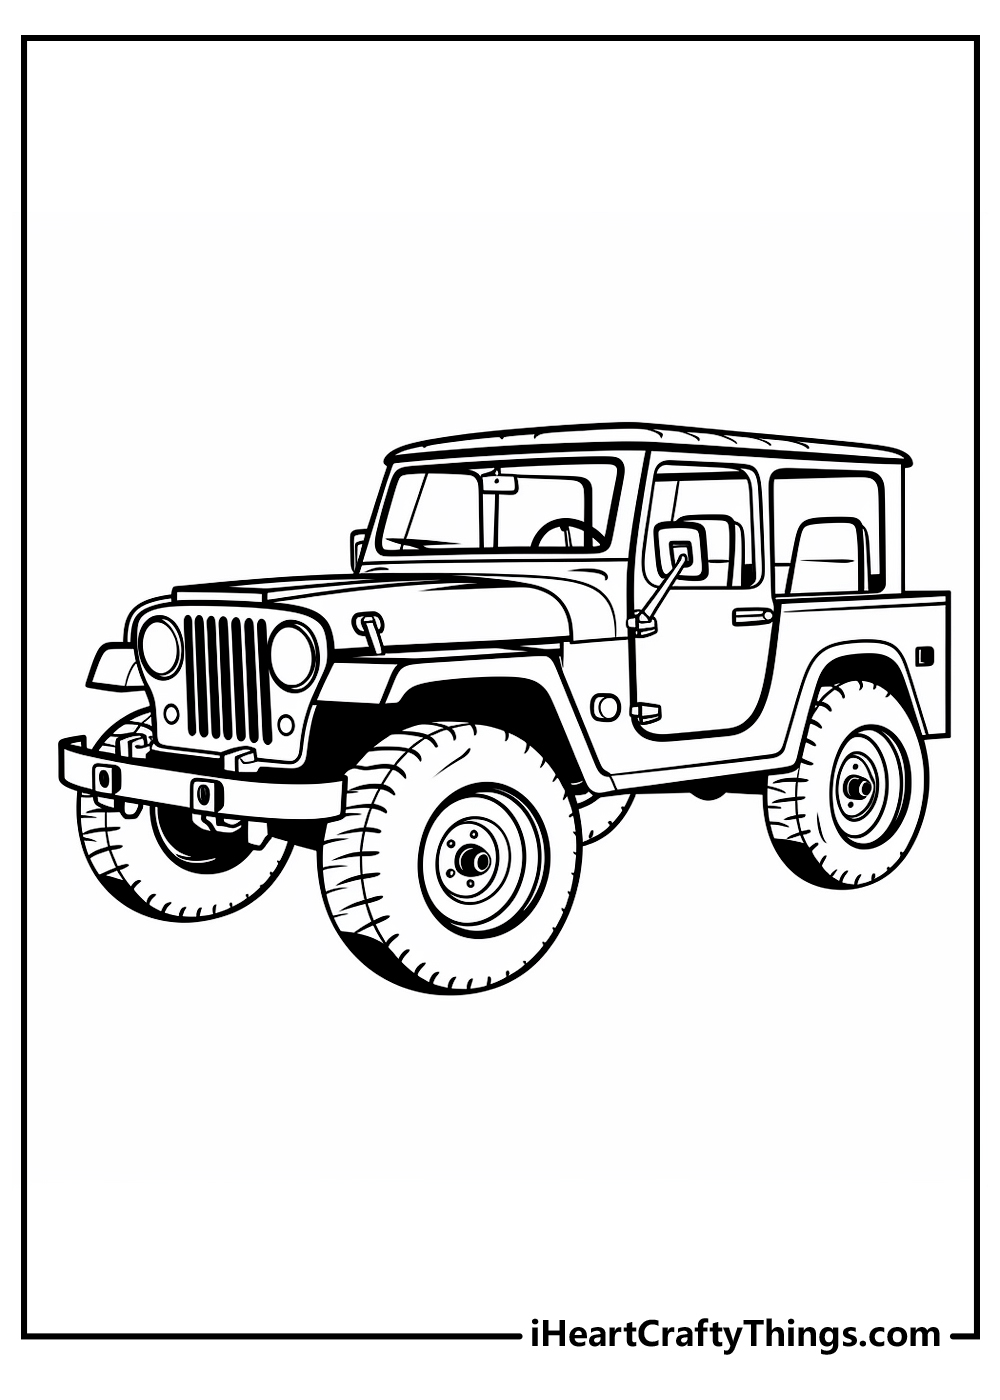 jeep coloring sheet free download